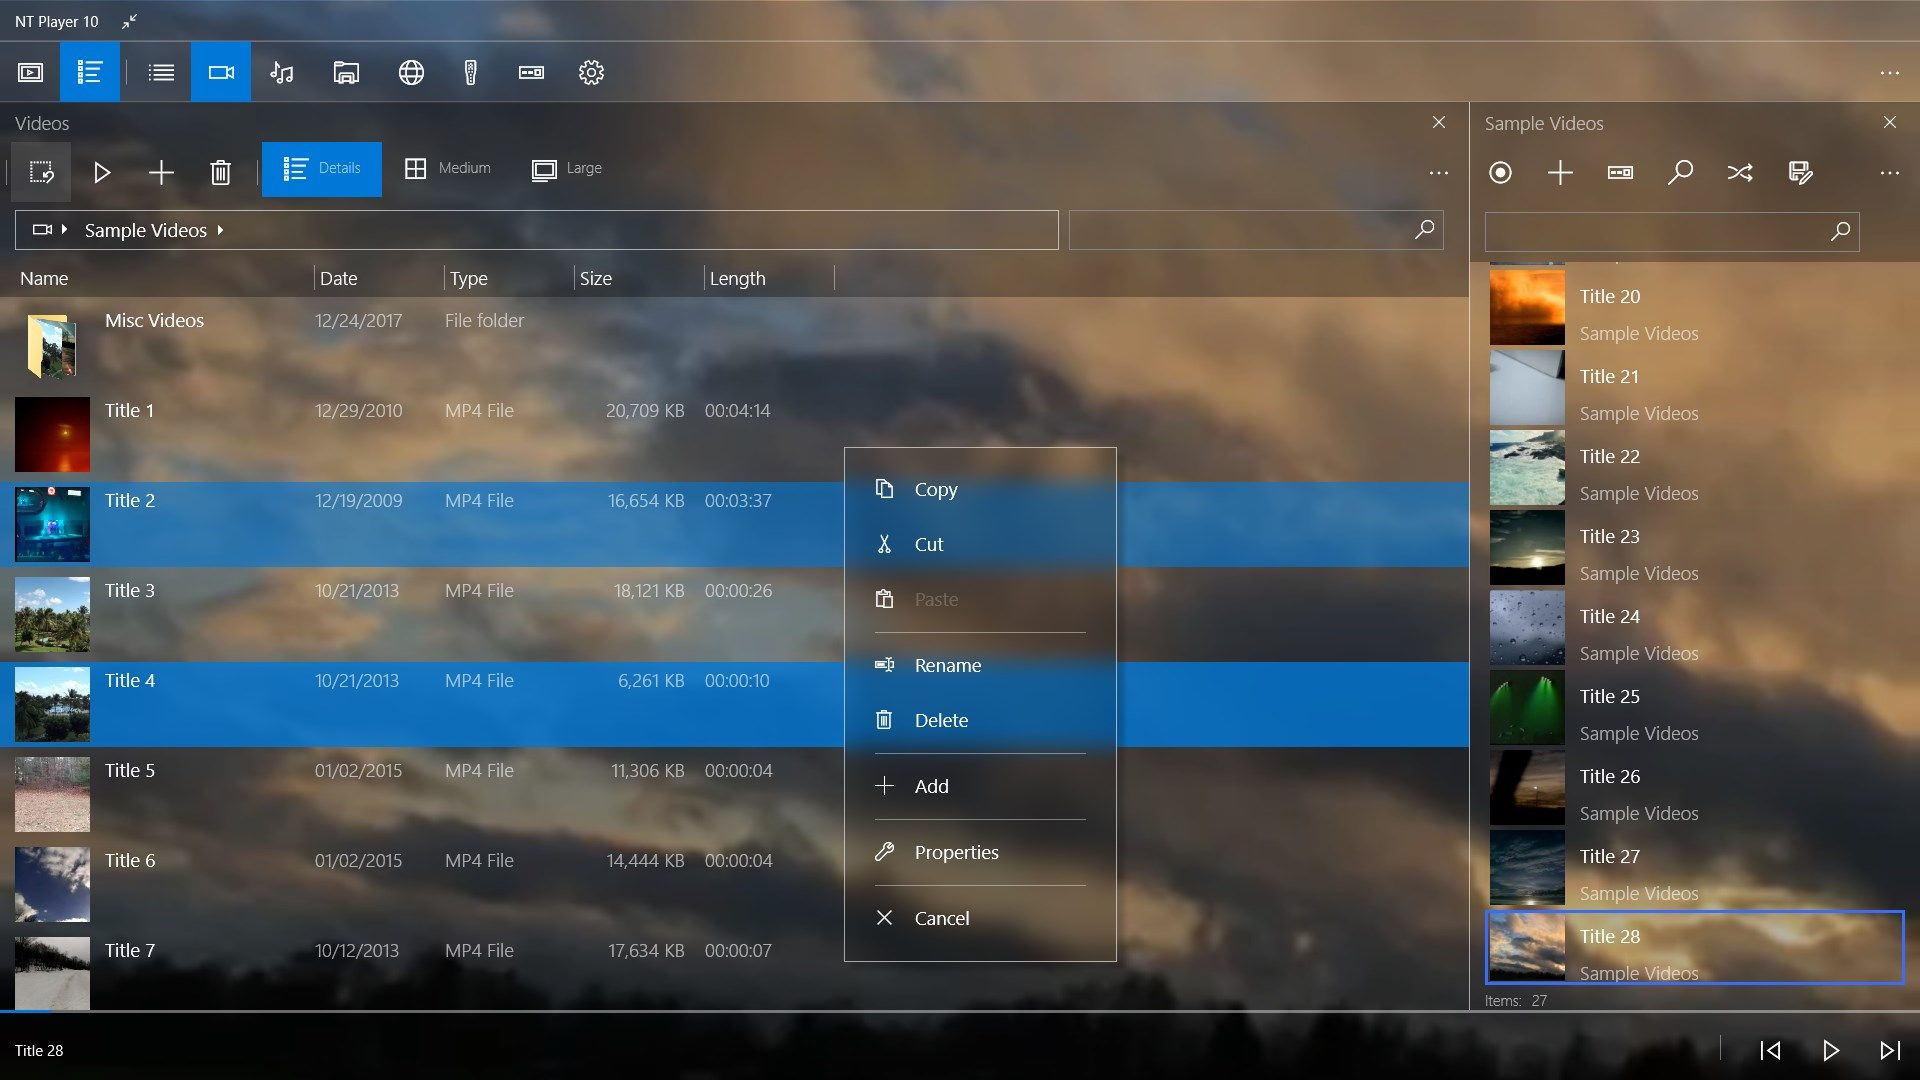 Video Library with selection context menu and Now Playing